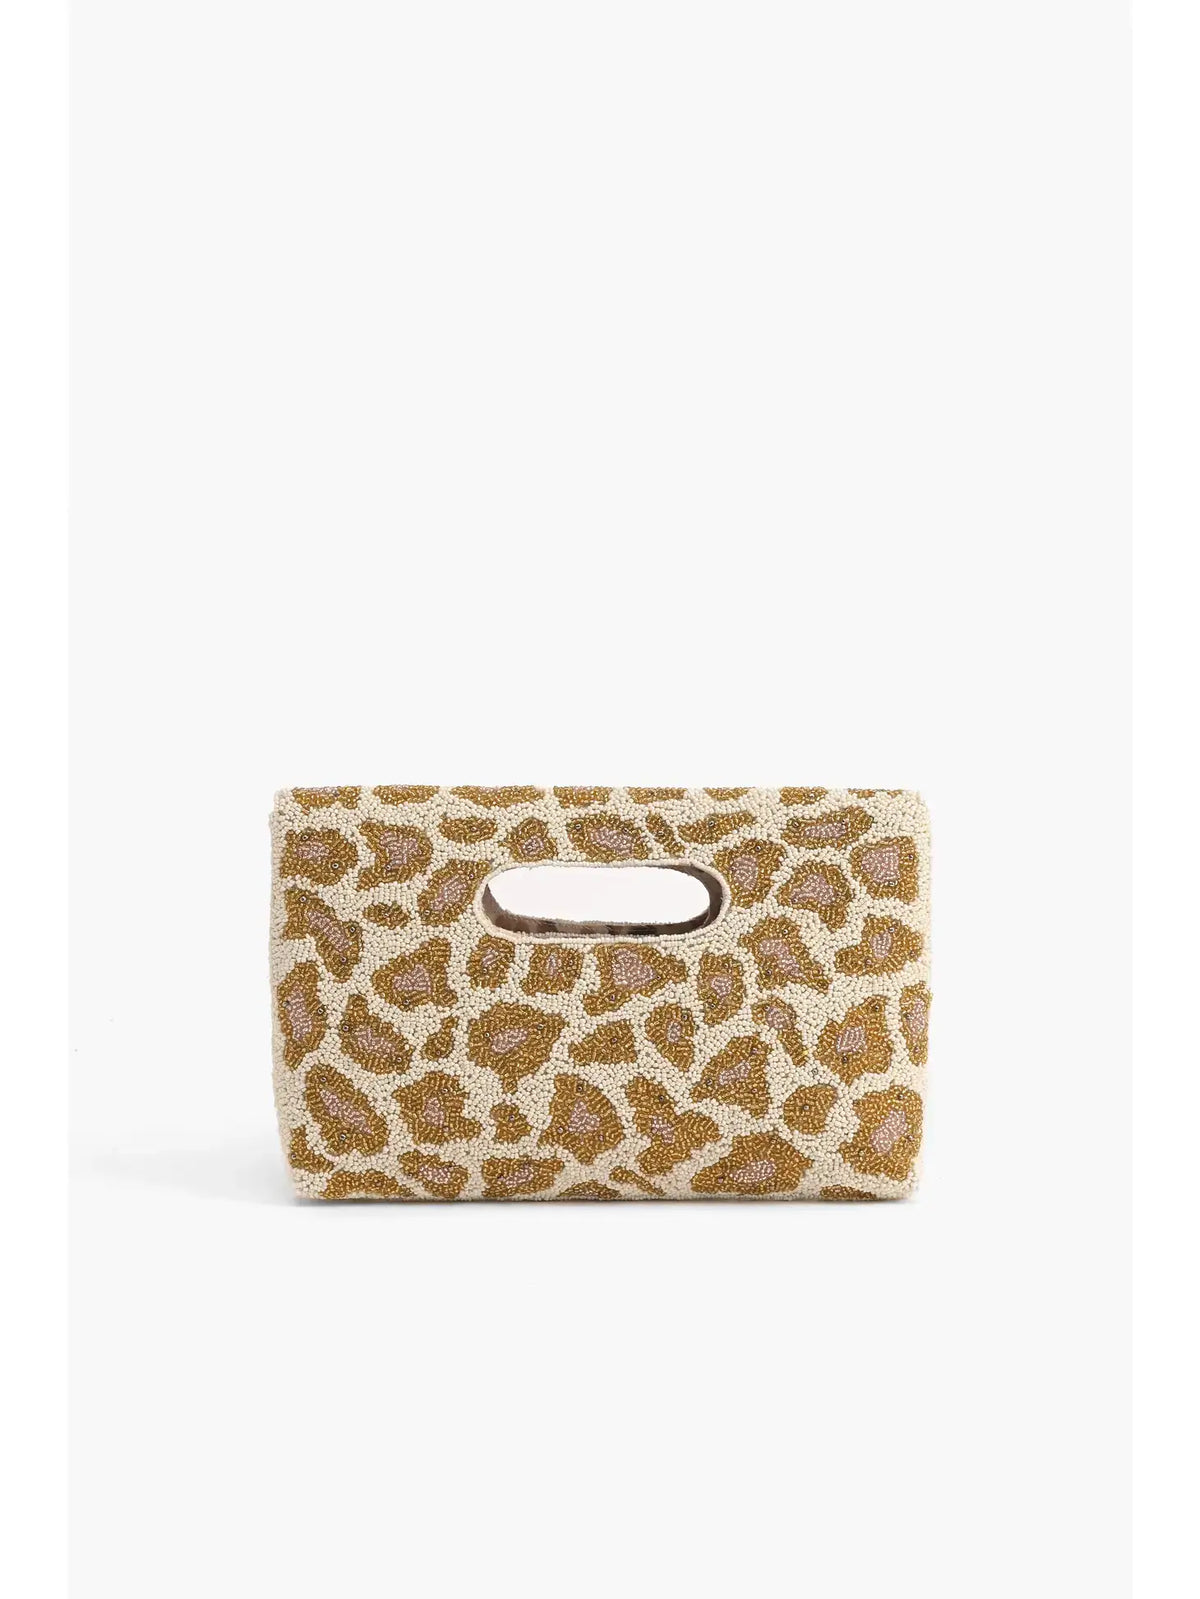 America and Beyond Rose Gold Leopard Clutch